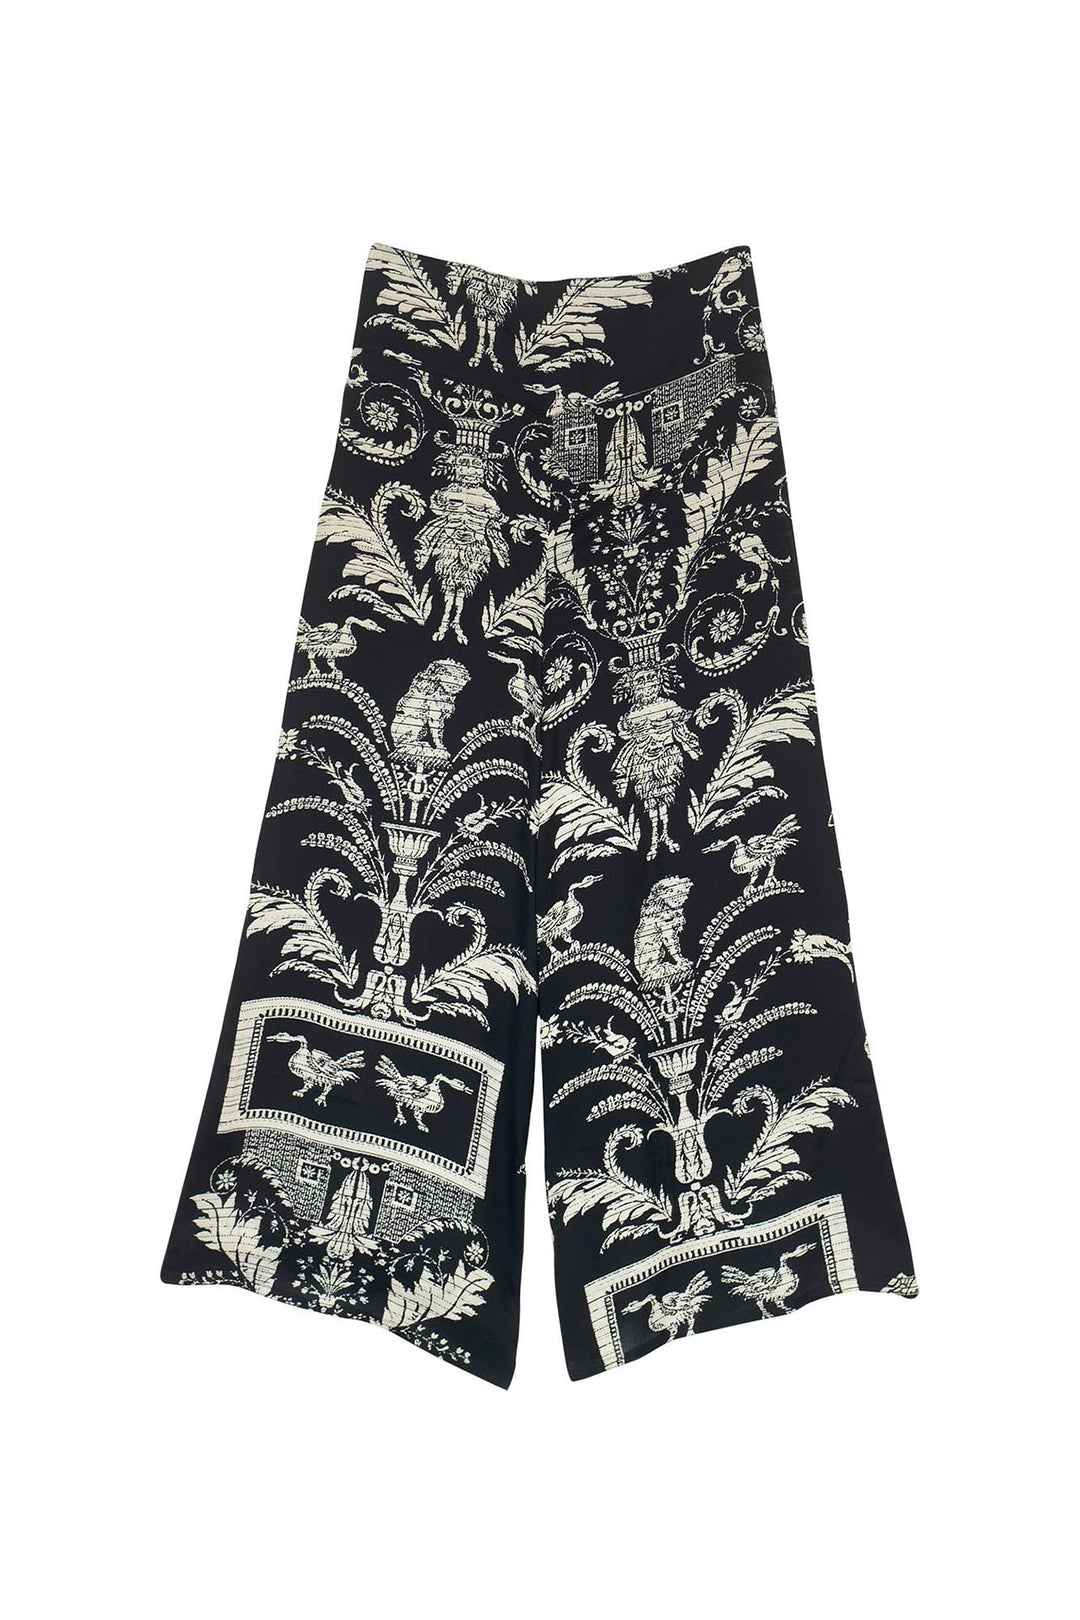 ladies palazzo pants in black and white vintage damask print by One Hundred Stars